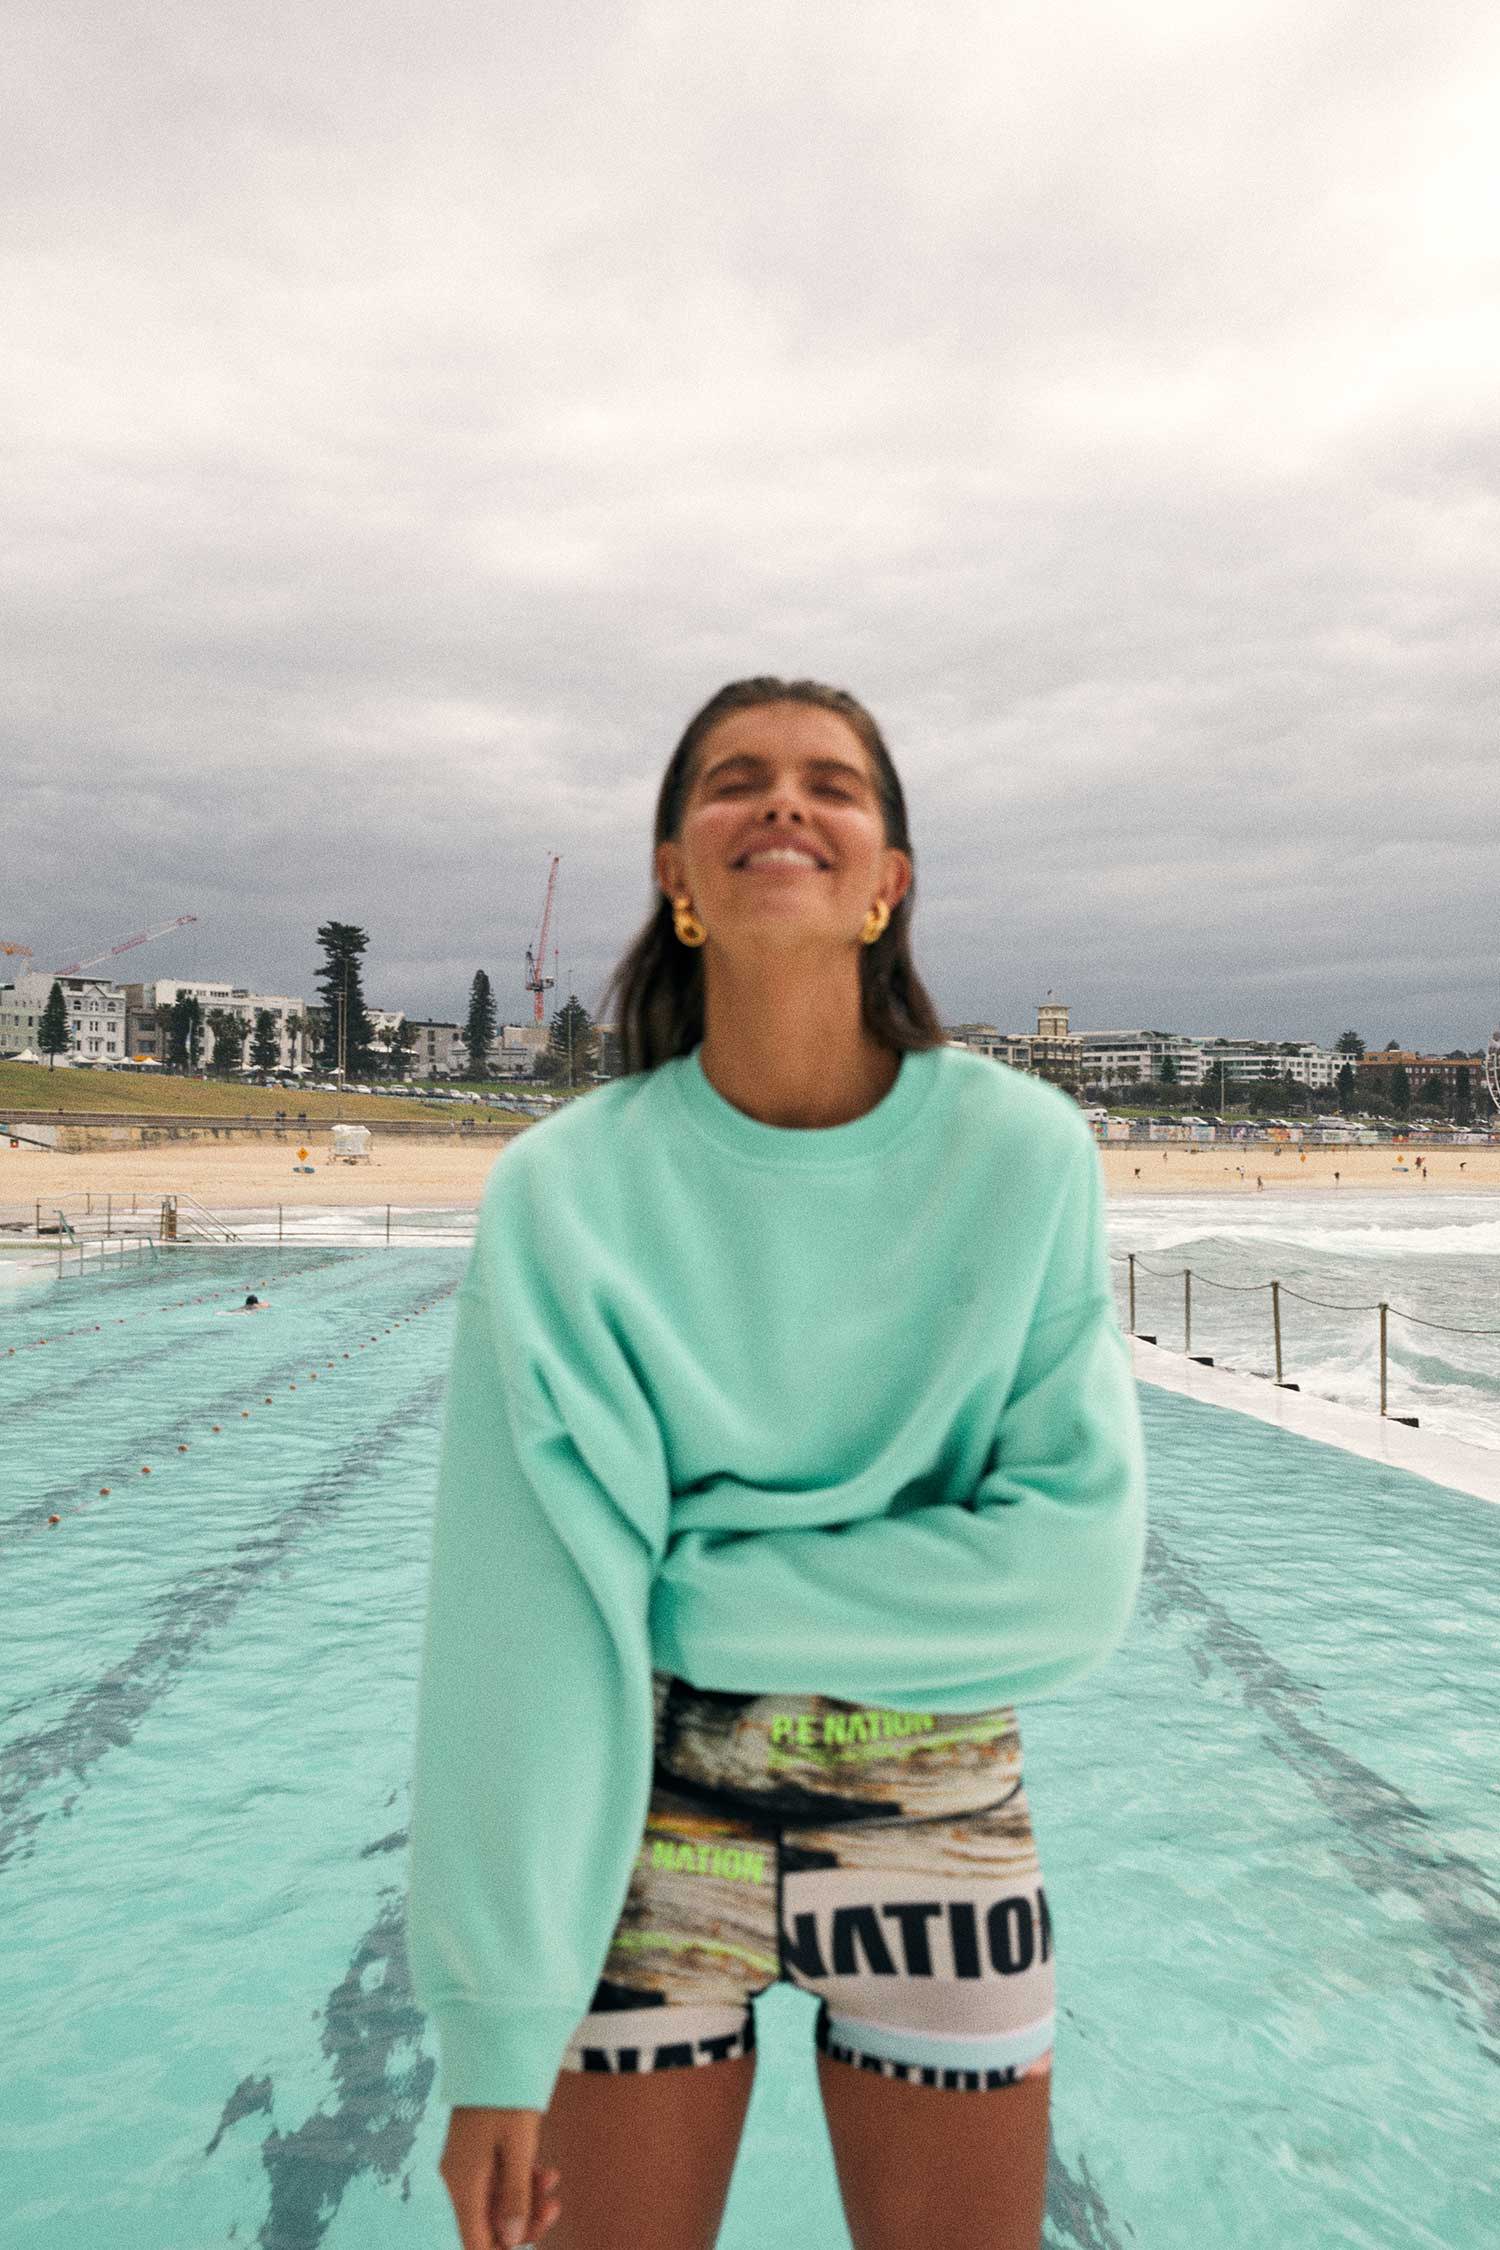 Girl standing next to a pool in a sweater